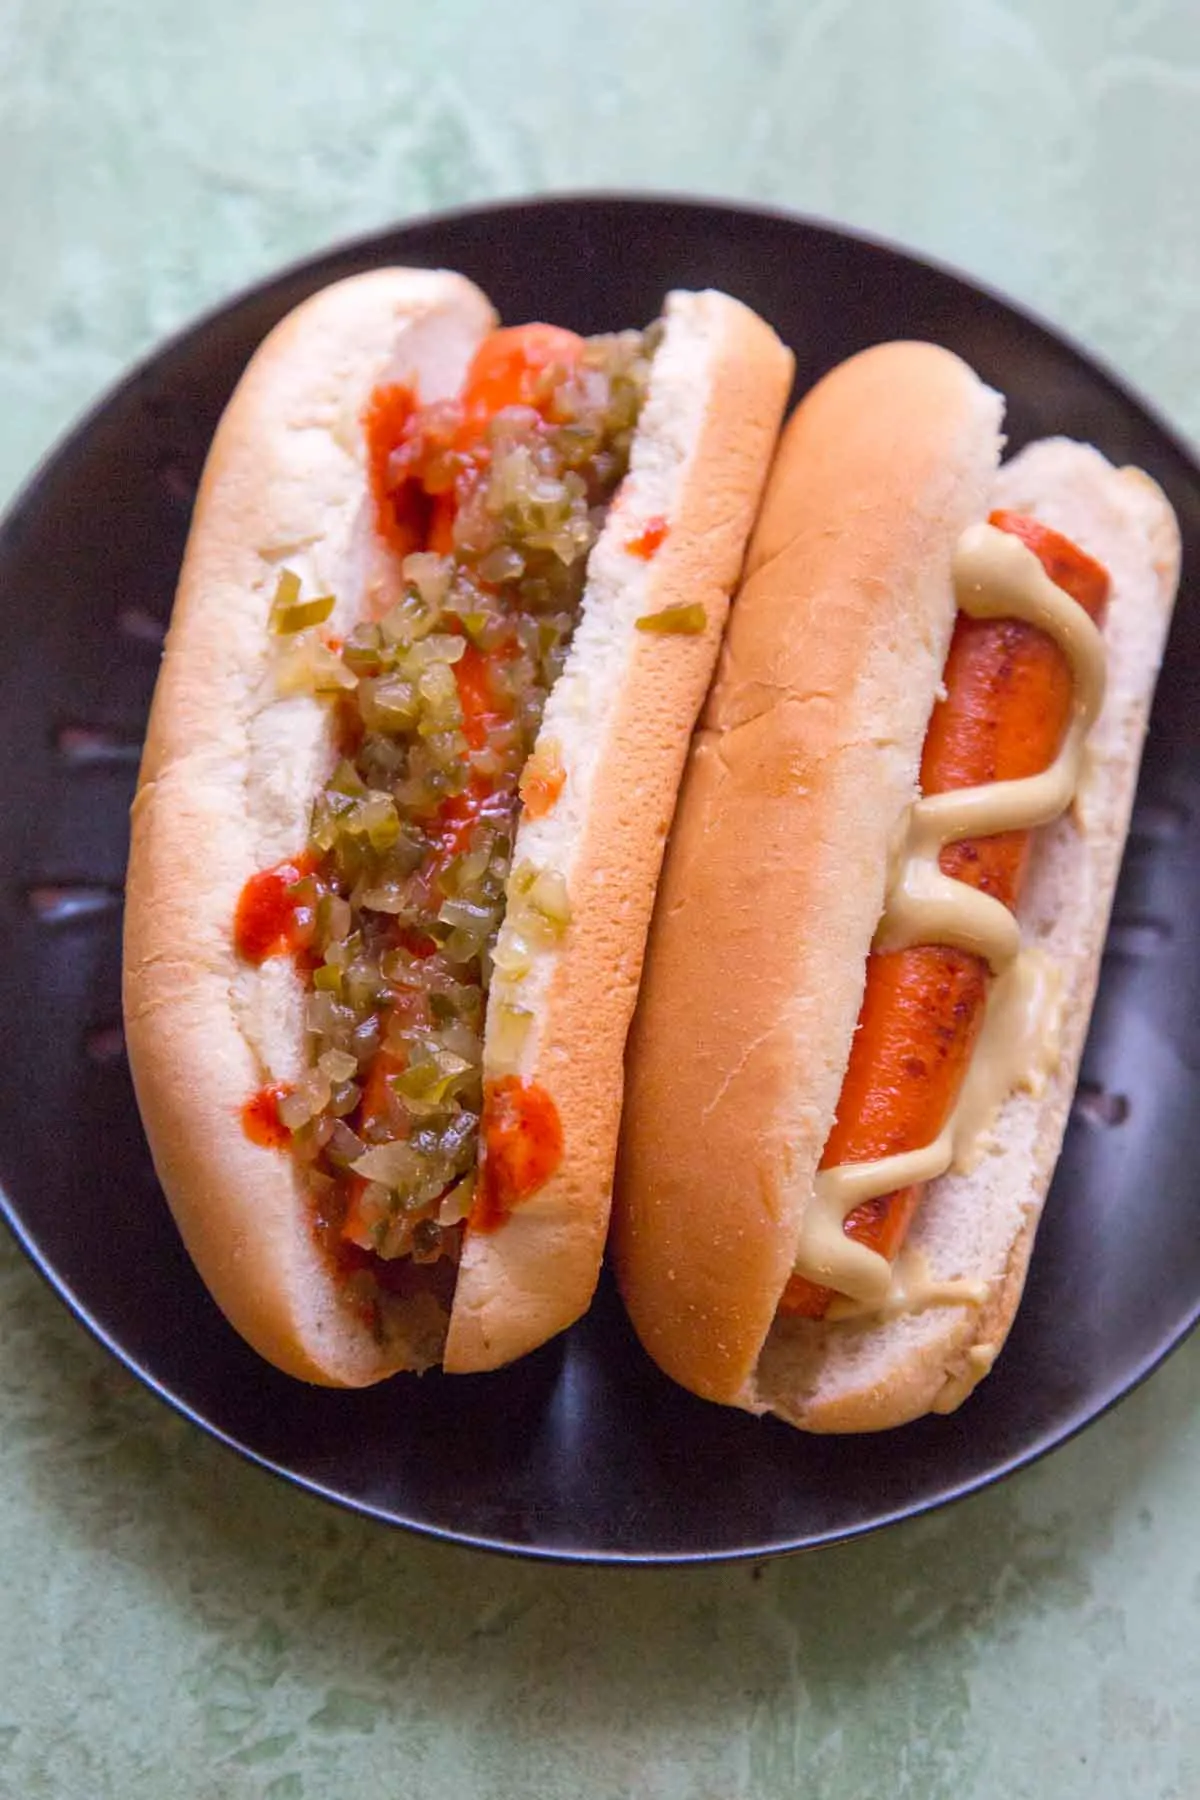 two vegan carrot hot dogs in bun with toppings